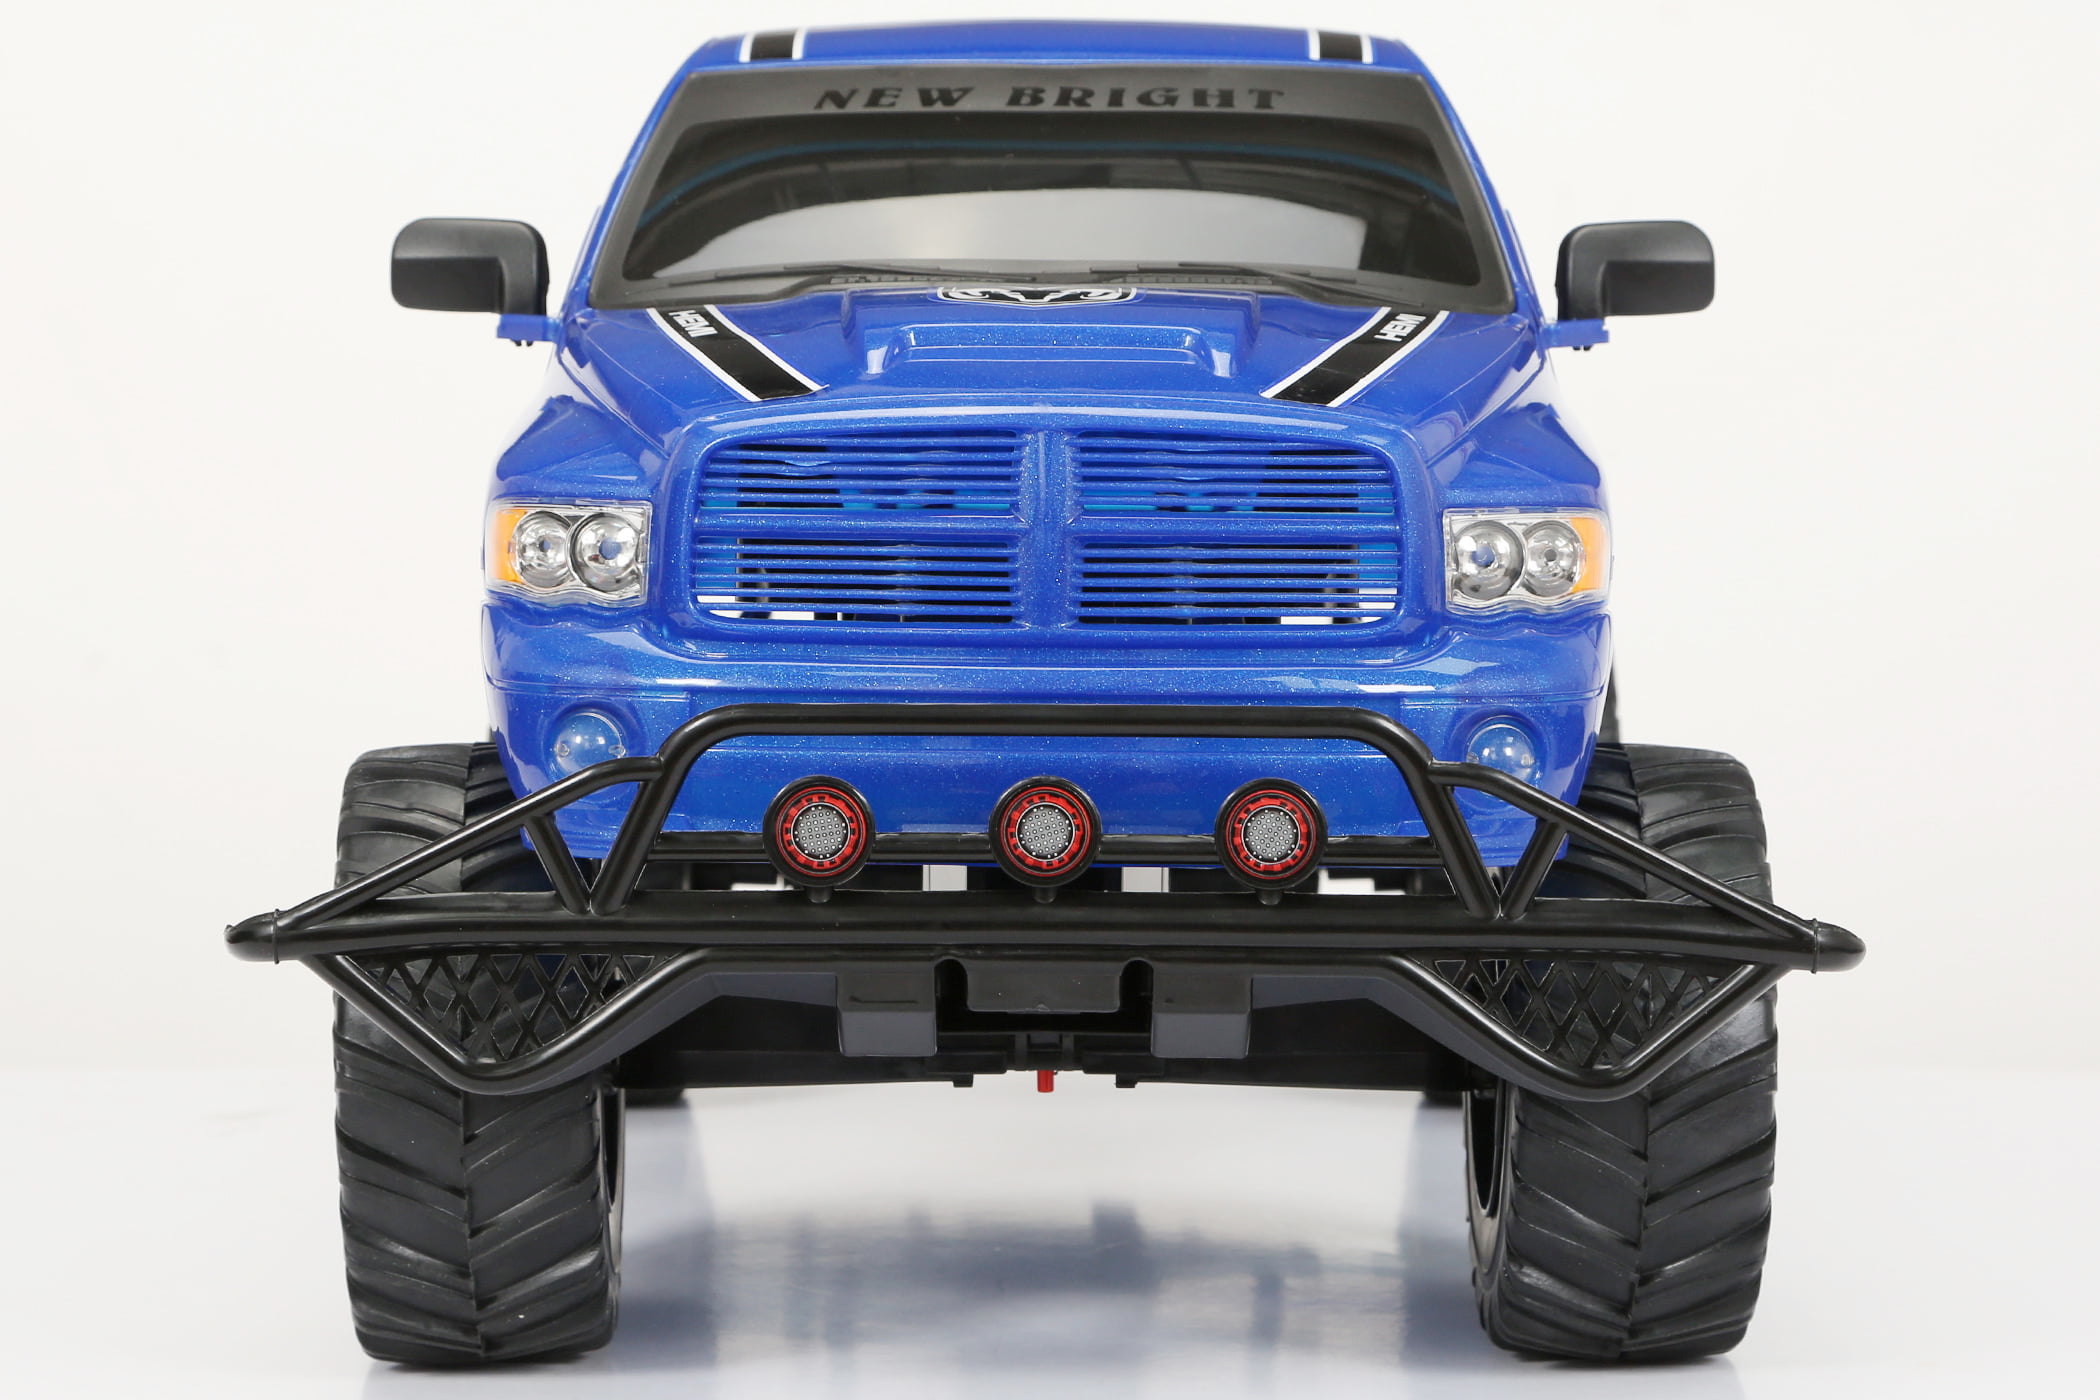 New Open Box Tyco R/C Dodge Ram Street Beast with Rechargeable Battery Pack